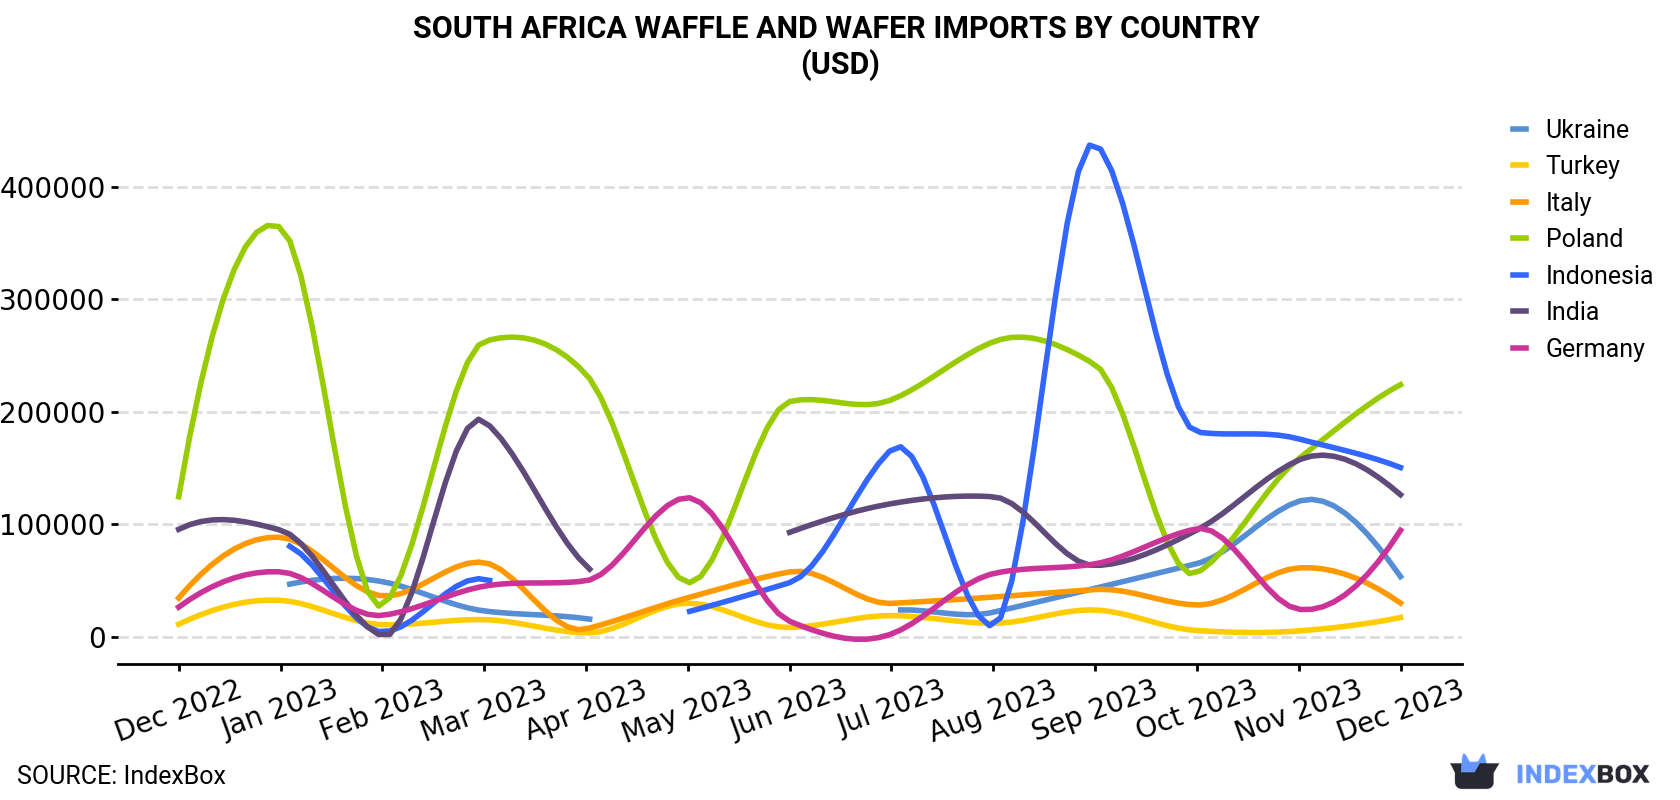 South Africa Waffle and Wafer Imports By Country (USD)